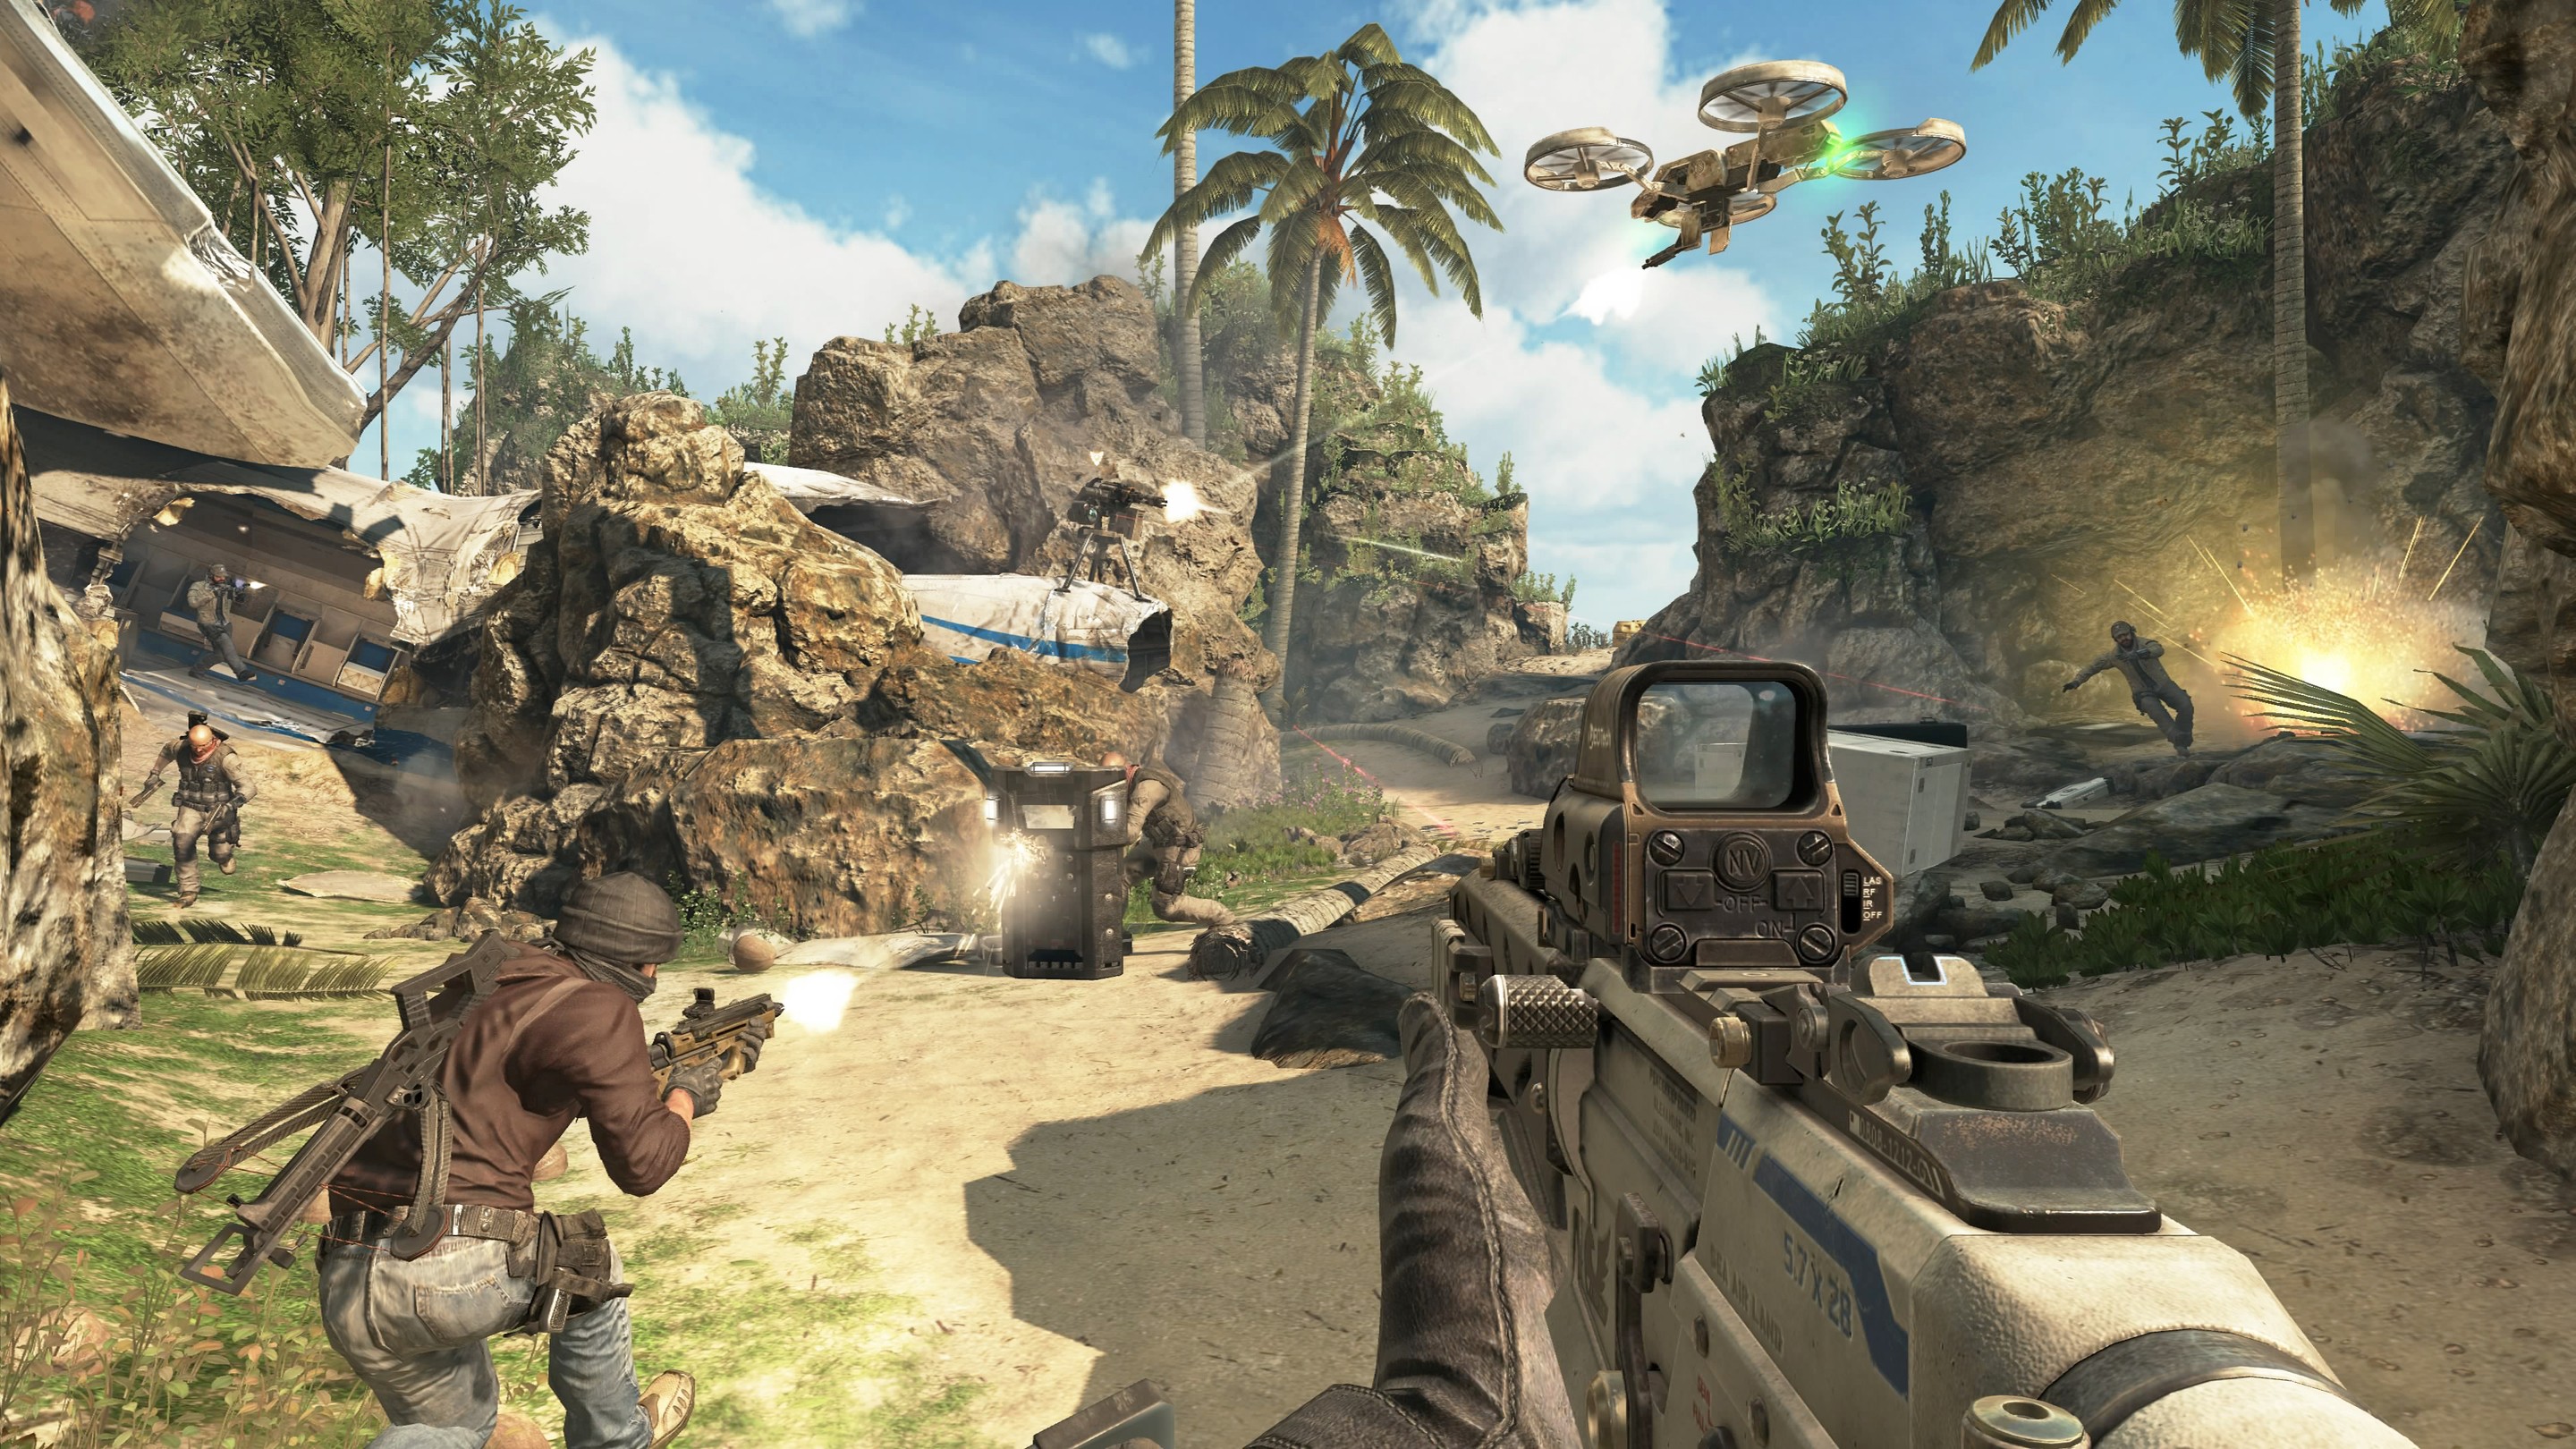 Call of Duty: Black Ops 2 is now available for pre-purchase on Steam